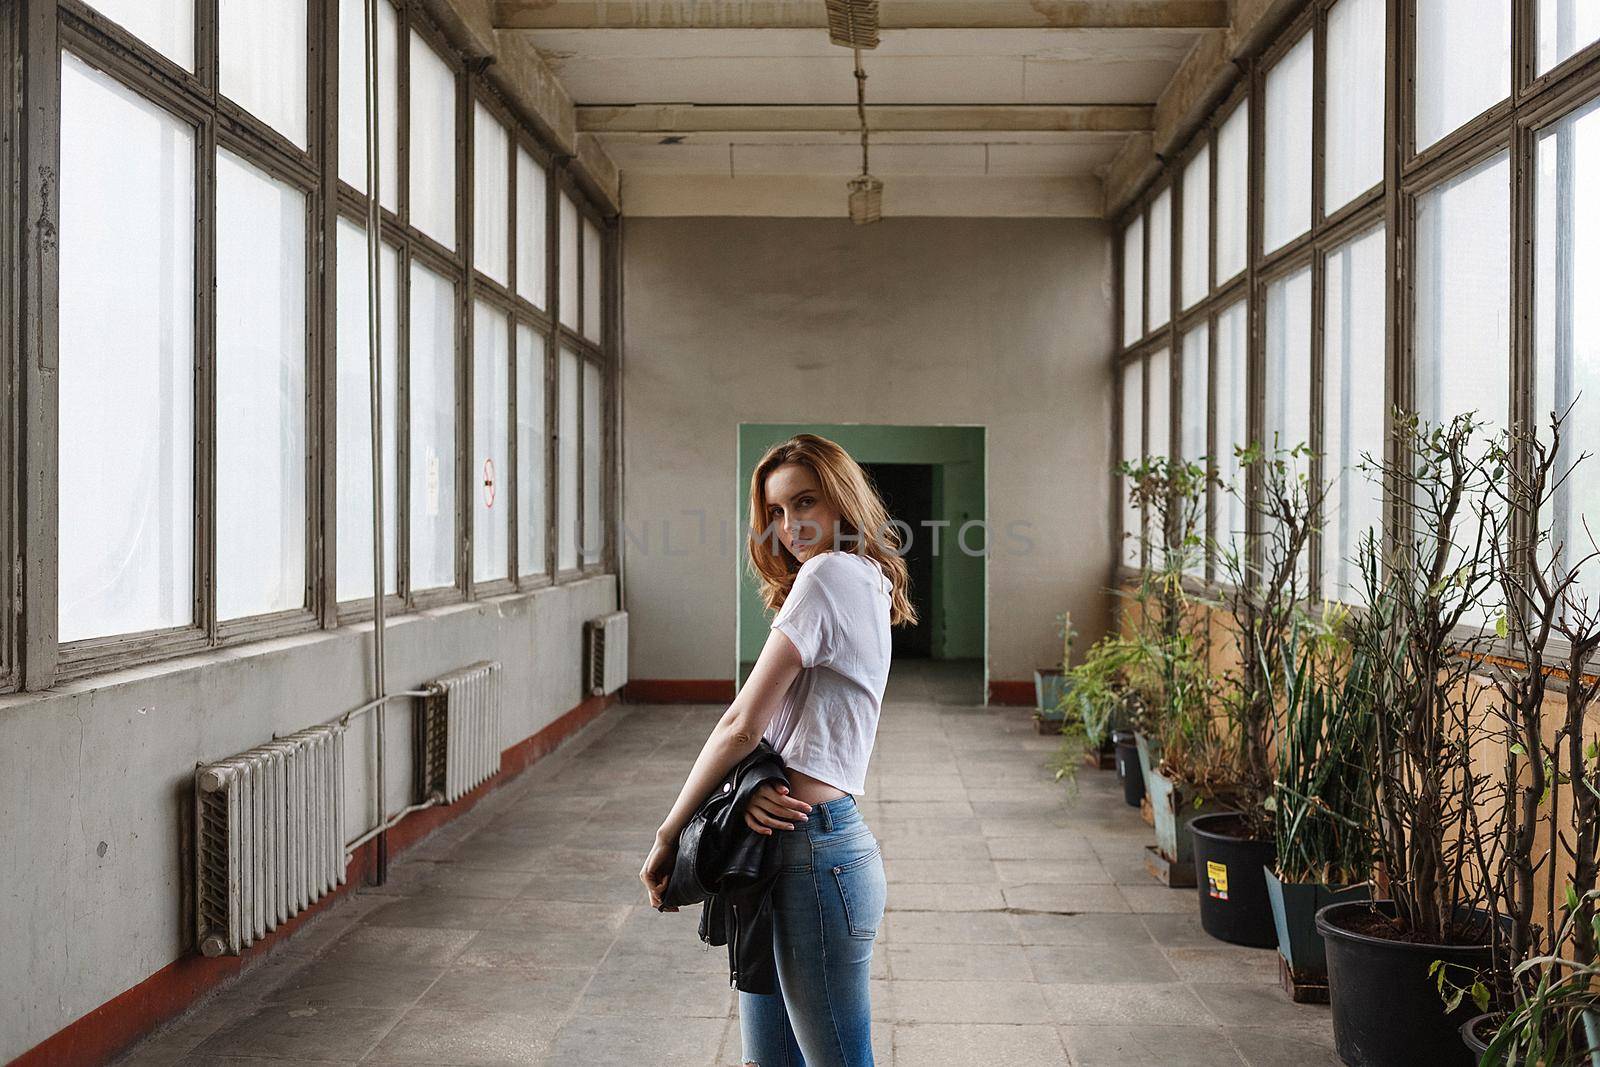 portrait of young caucasian woman standing in white t-shirt, blue ripped jeans at coridor with windows, radiators and houseplants. pretty lady stands in centre of old room